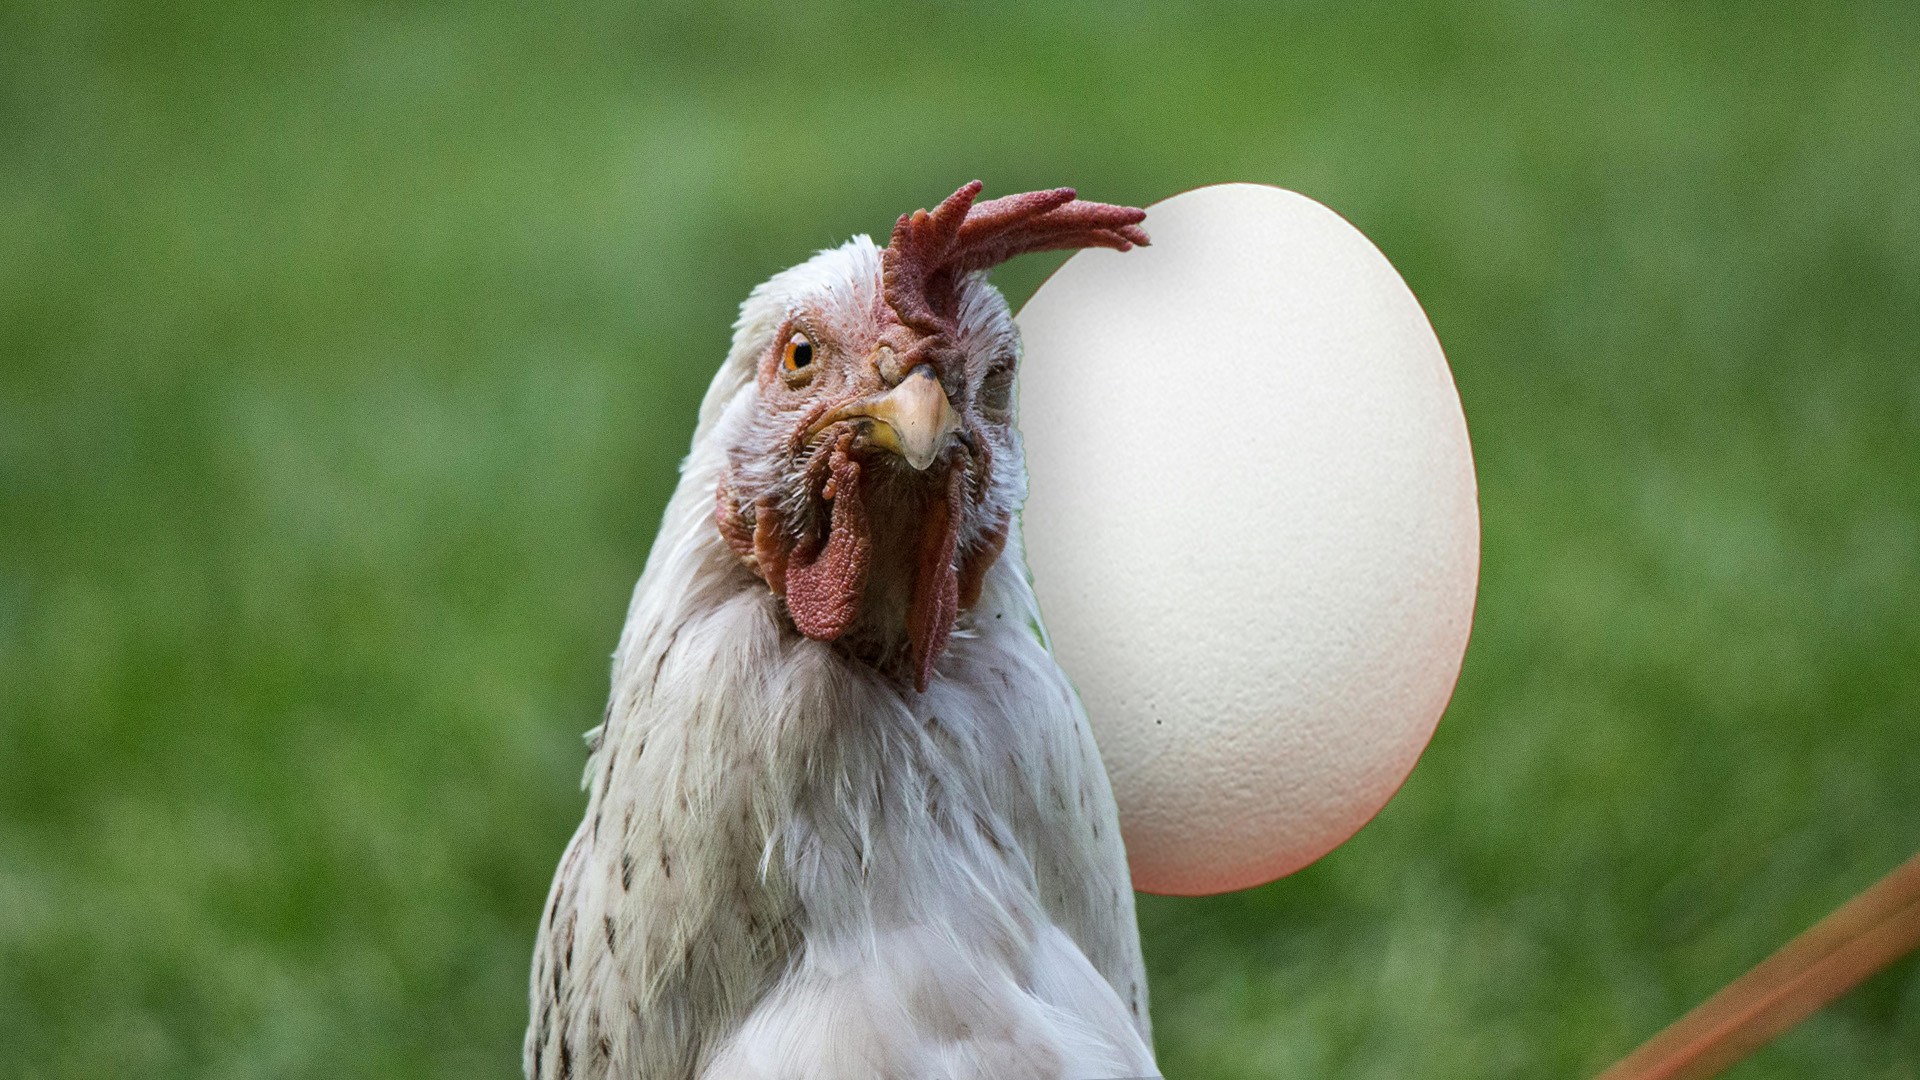 Chicken Vs. Egg: Scientists Finally Reveal Which Came First